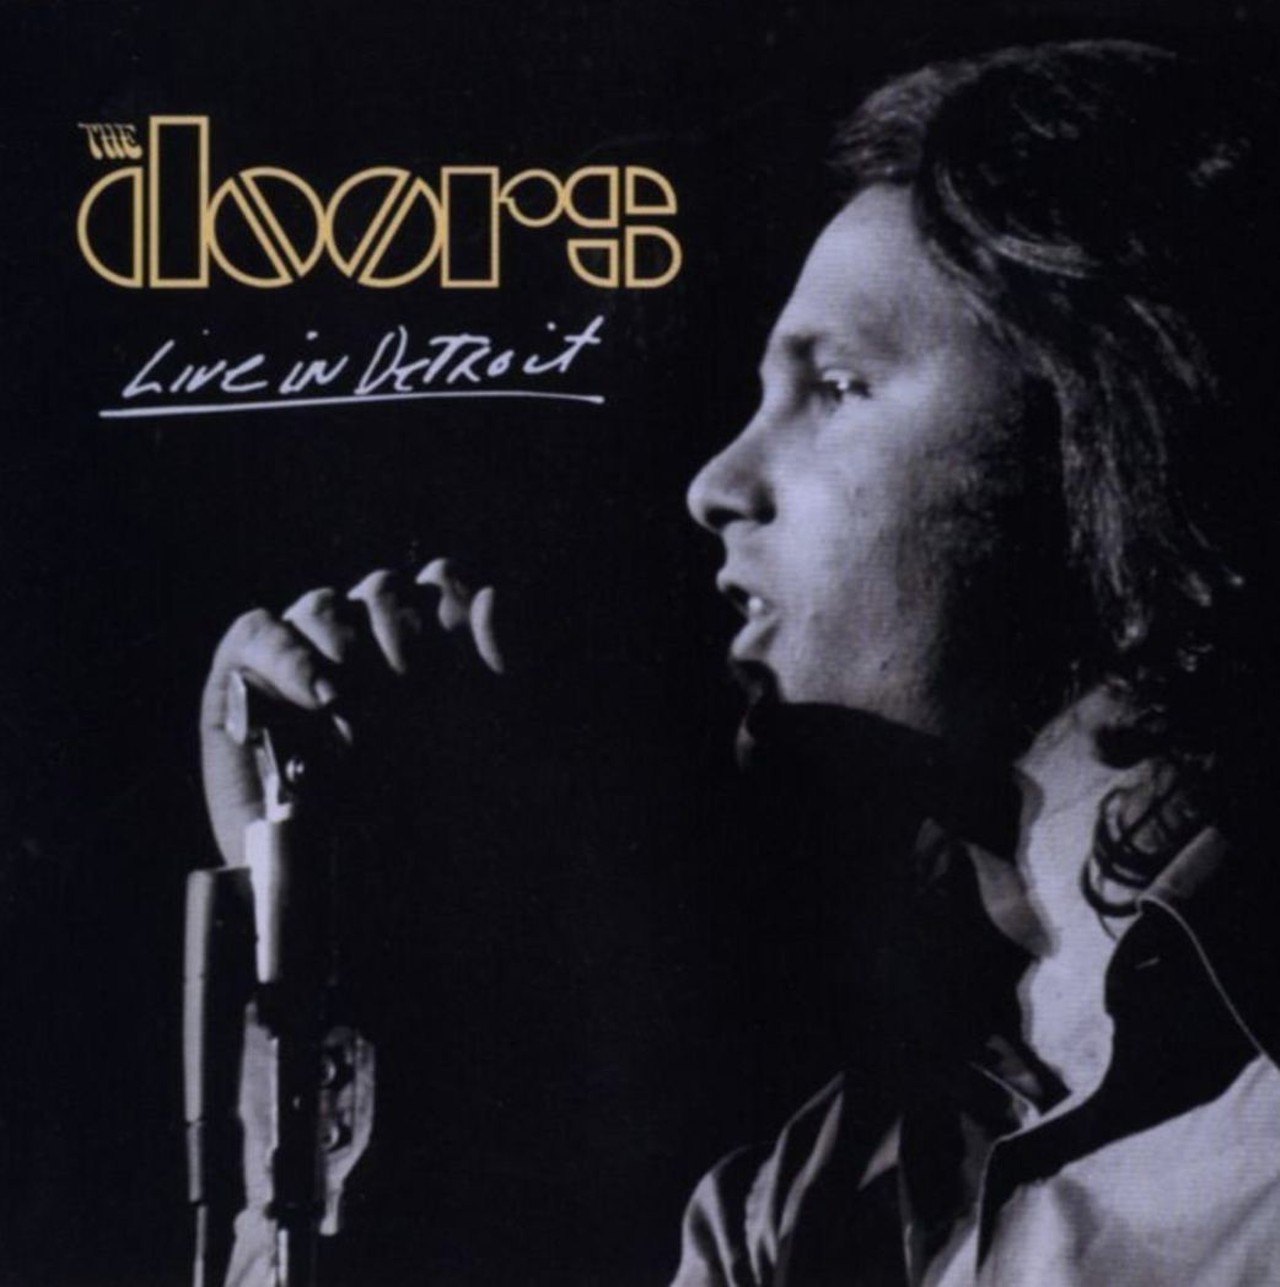 The Doors - Live In Detroit The Doors recorded this double live album on May 8, 1970 at Cobo Arena. It includes a nearly 20-minute version of "Light My Fire," deep cuts like "Dead Cats, Dead Rats," and a nearly 18-minute version of The End to end the show.